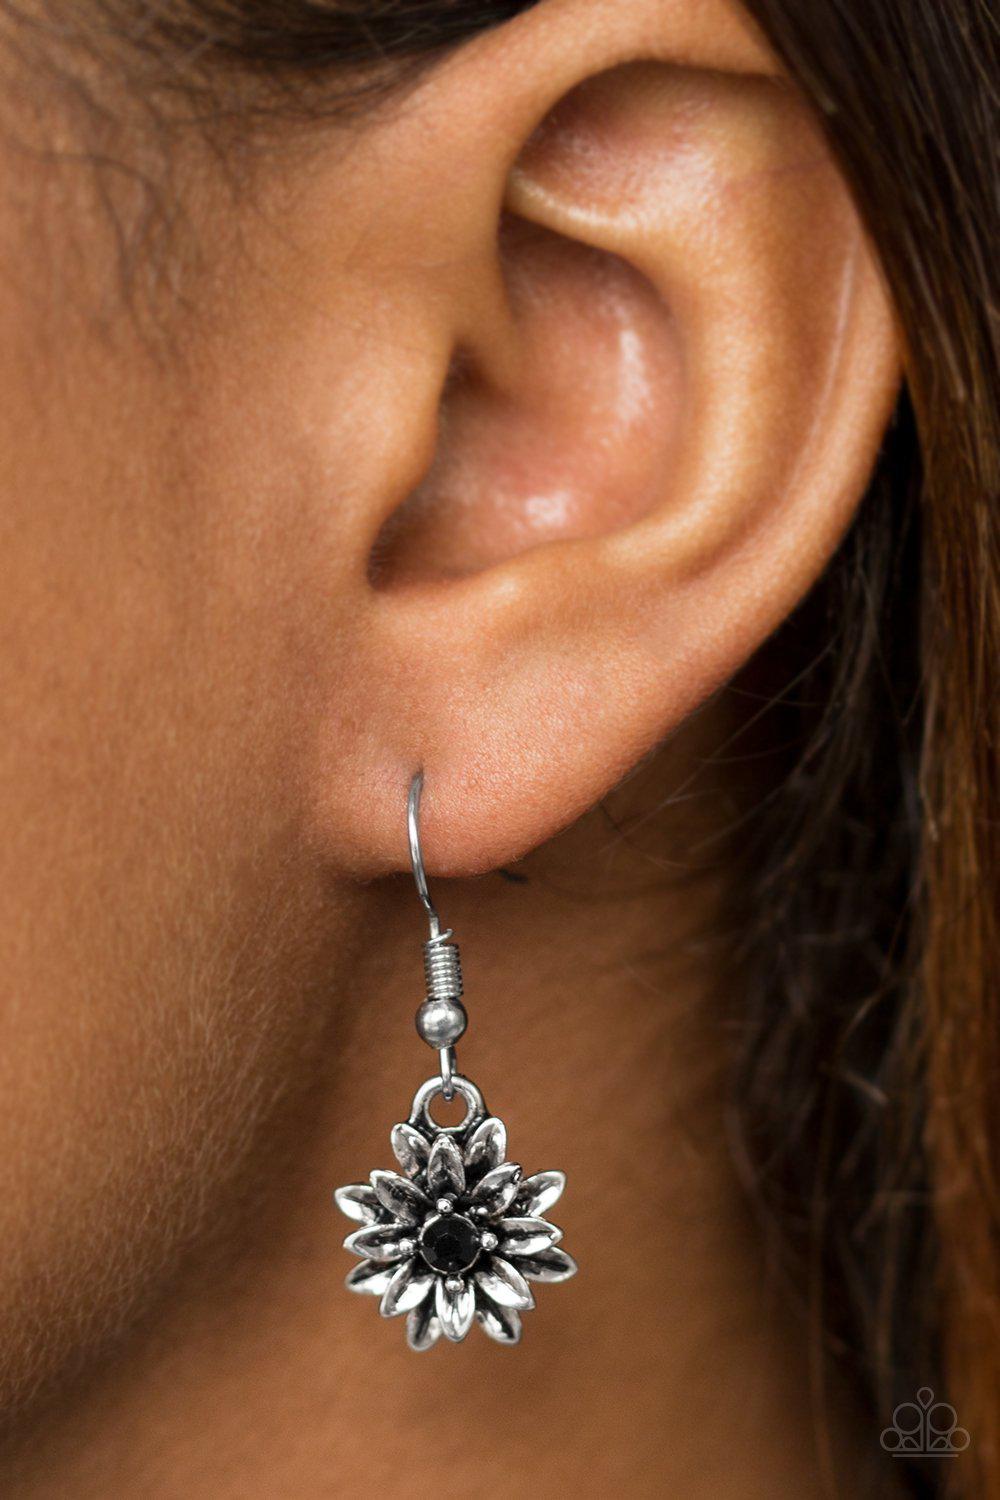 Diamonds and Daisies Black Flower Earrings - Paparazzi Accessories-CarasShop.com - $5 Jewelry by Cara Jewels